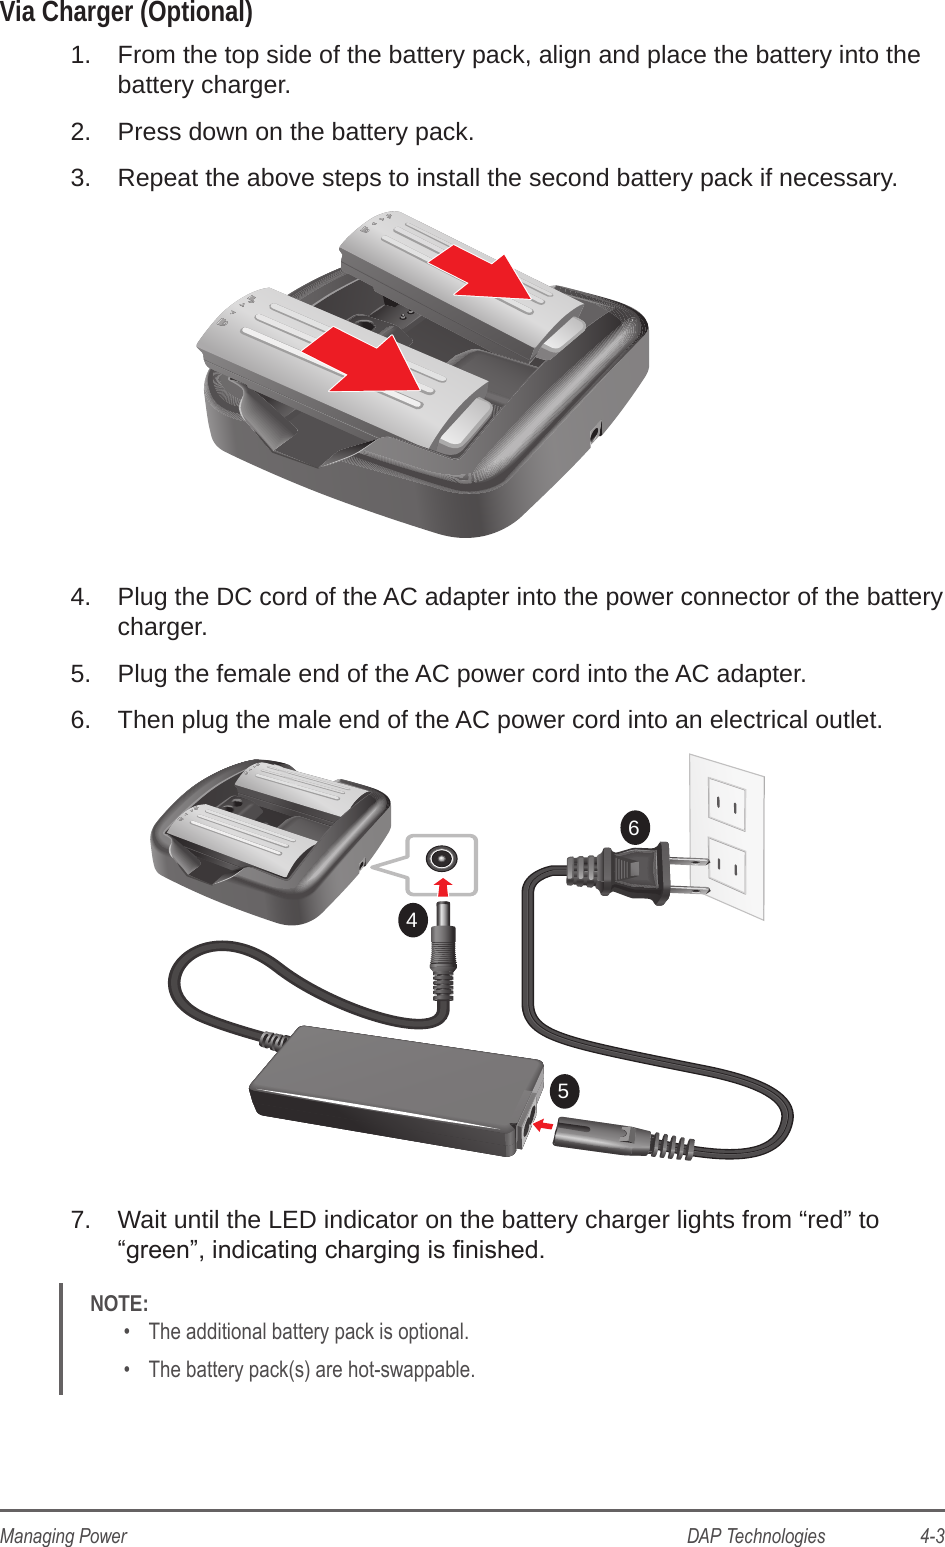 DAP Technologies                    4-3Managing PowerVia Charger (Optional)1.  From the top side of the battery pack, align and place the battery into the battery charger.2.  Press down on the battery pack.3.  Repeat the above steps to install the second battery pack if necessary.4.  Plug the DC cord of the AC adapter into the power connector of the battery charger.5.  Plug the female end of the AC power cord into the AC adapter.6.  Then plug the male end of the AC power cord into an electrical outlet.6547.  Wait until the LED indicator on the battery charger lights from “red” to “green”, indicating charging is nished.NOTE: •  The additional battery pack is optional.•  The battery pack(s) are hot-swappable.